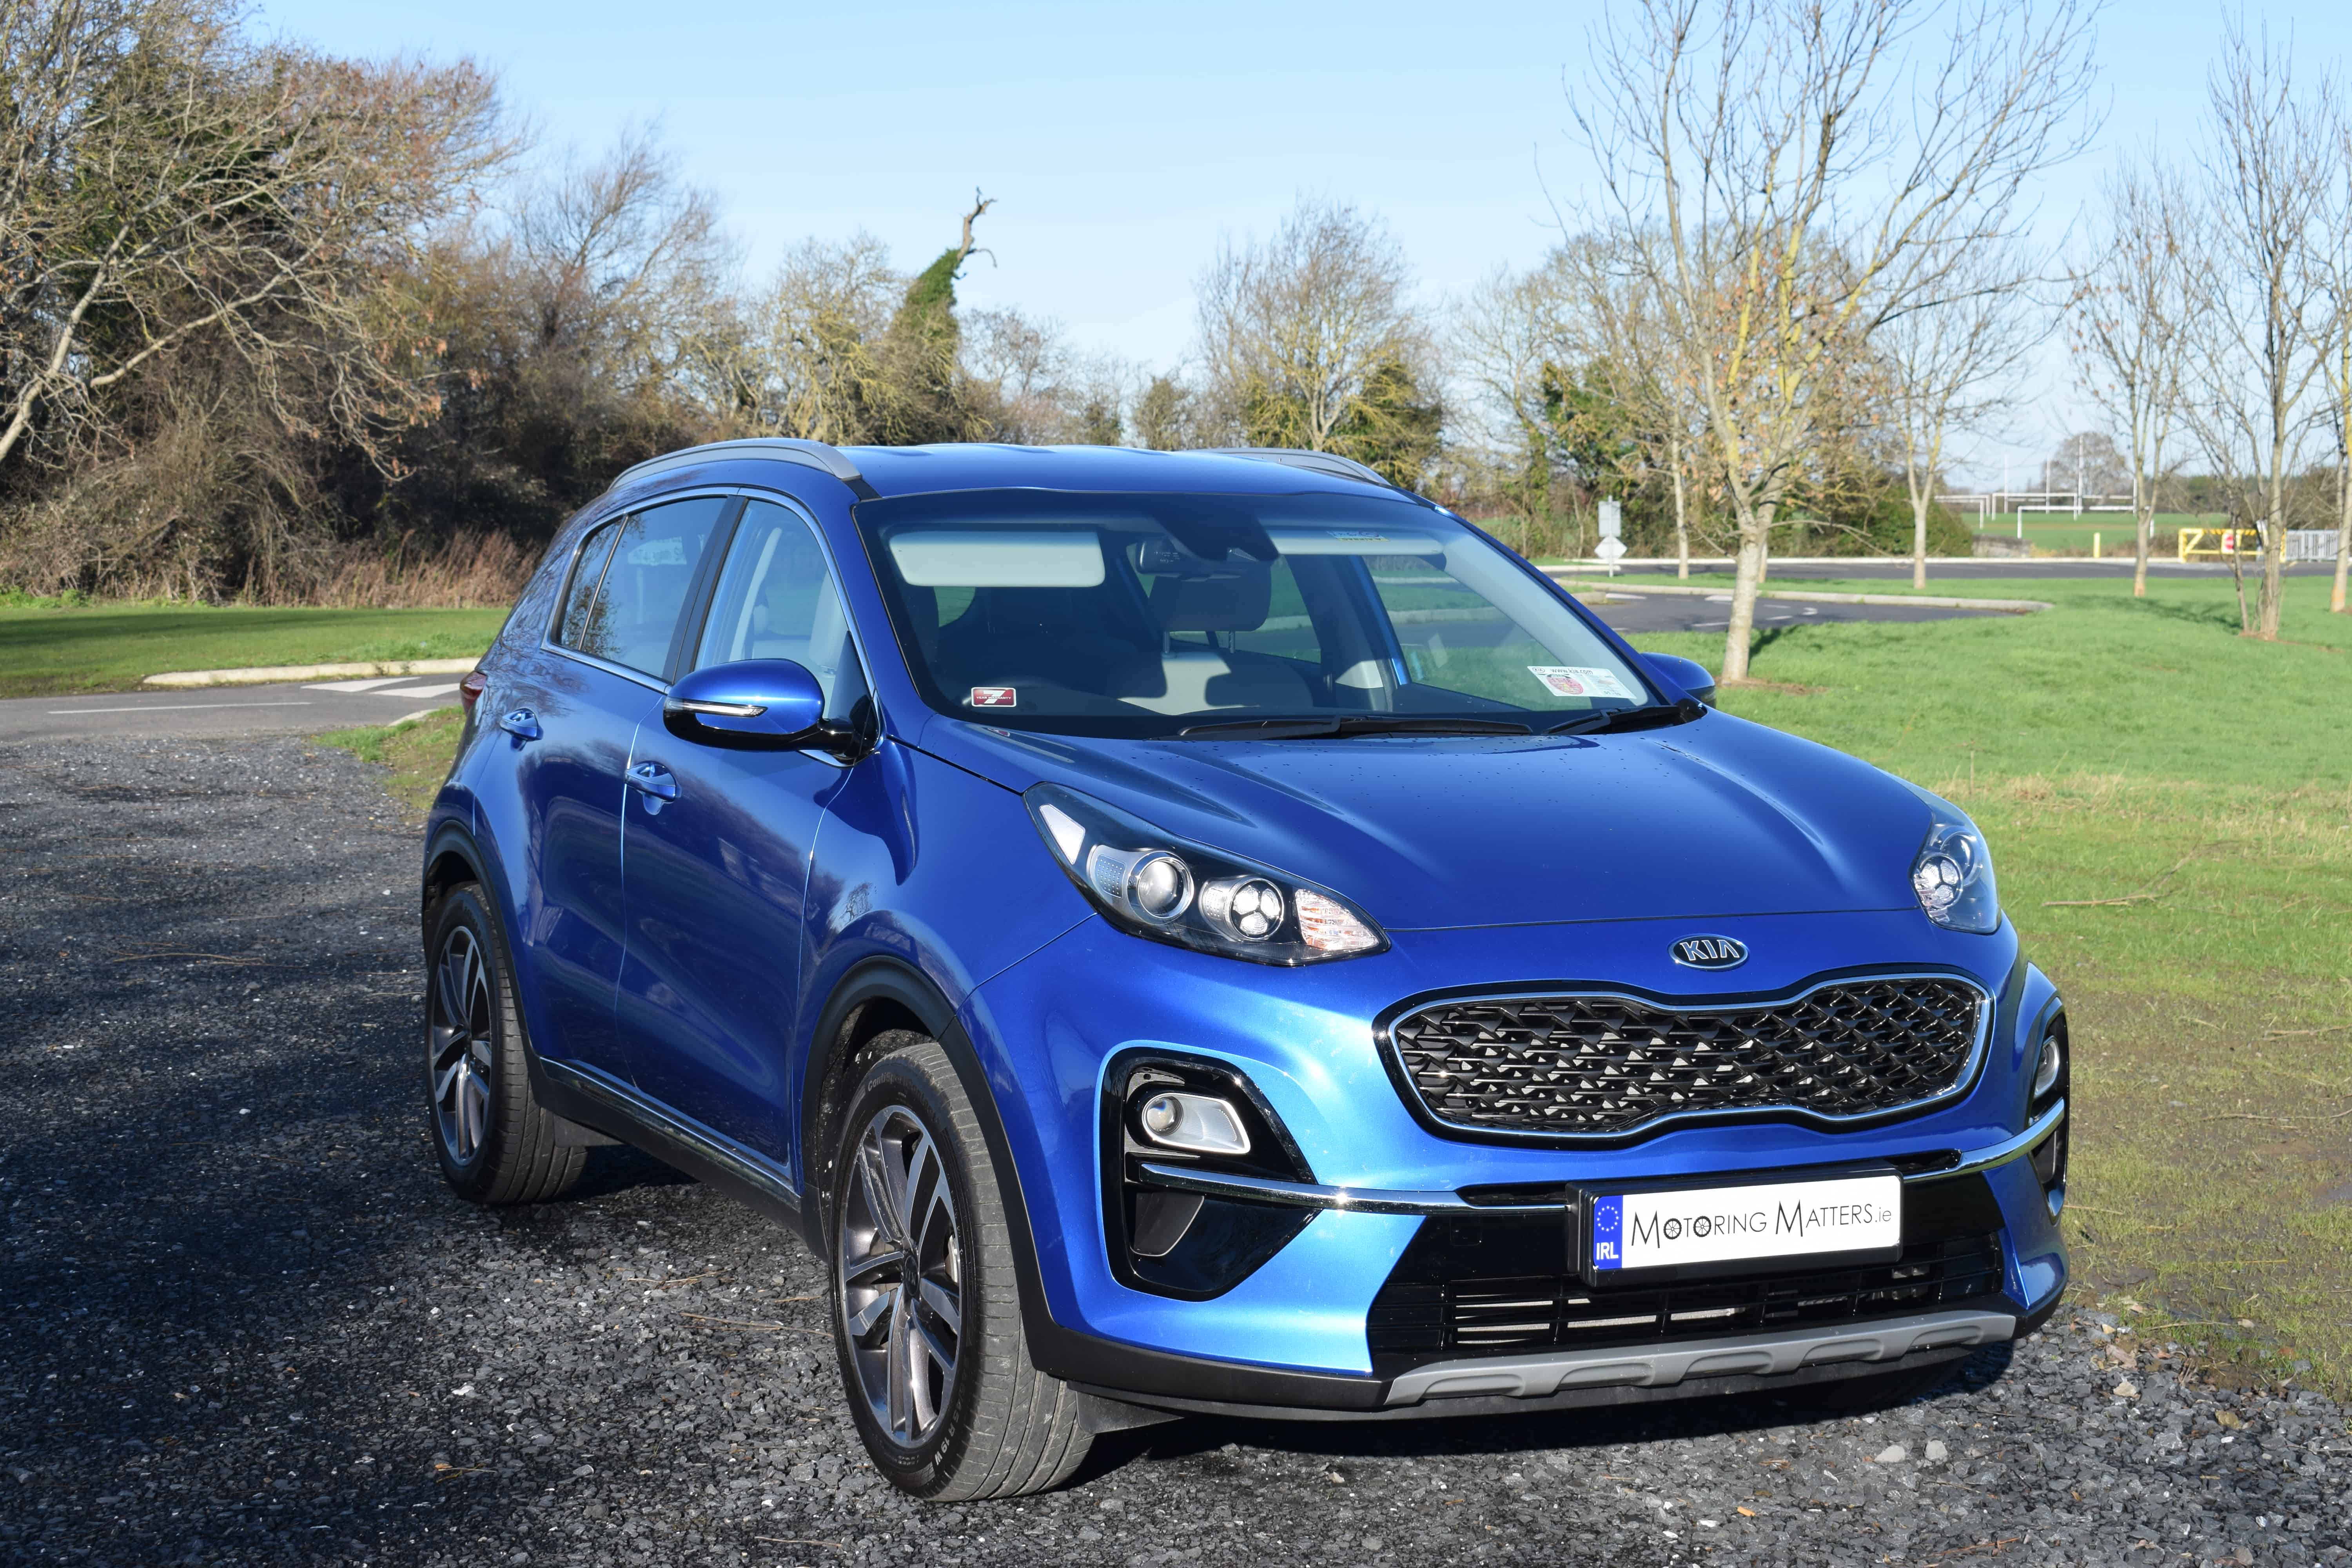 New KIA Sportage Now Even More Appealing. Motoring Matters